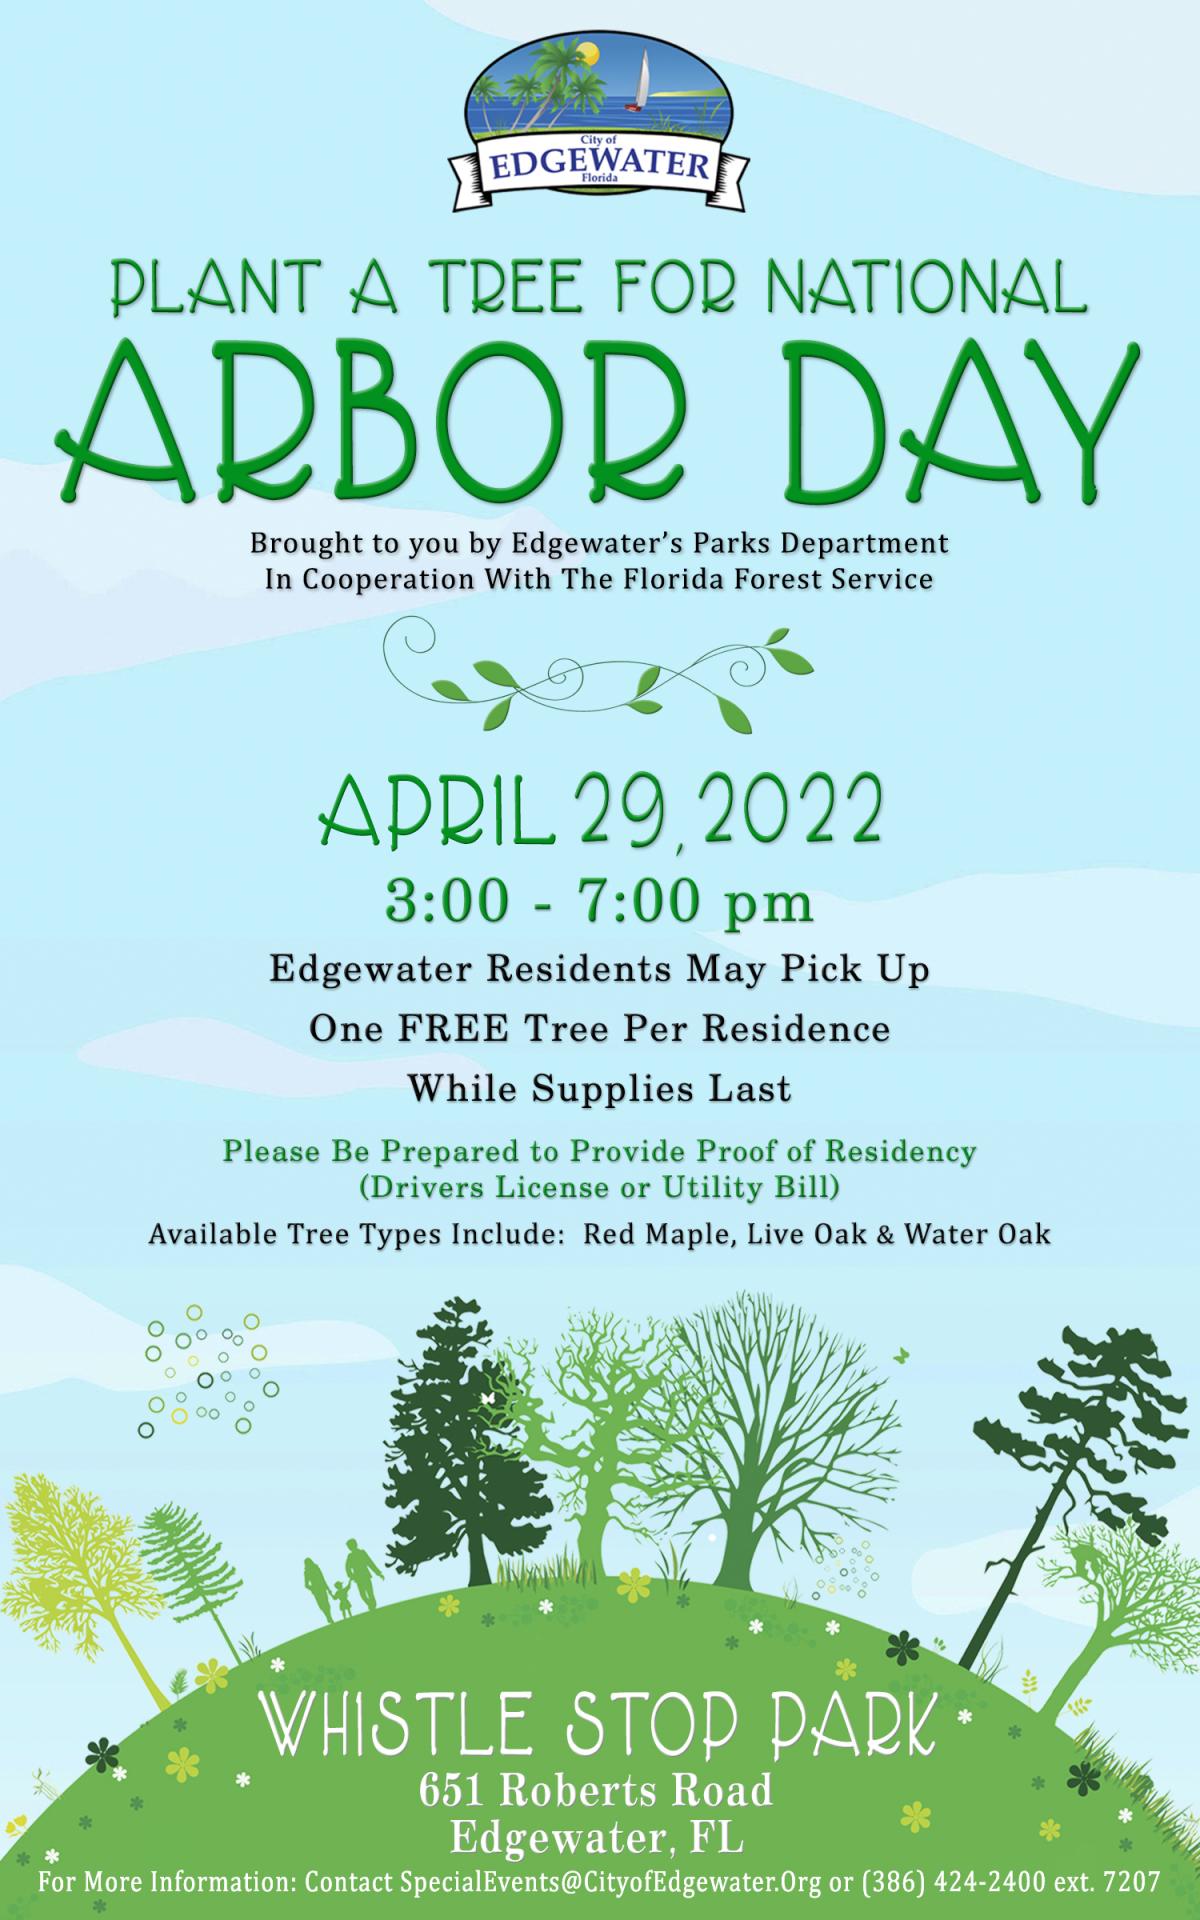 Plant a Tree for Arbor Day City of Edgewater Florida